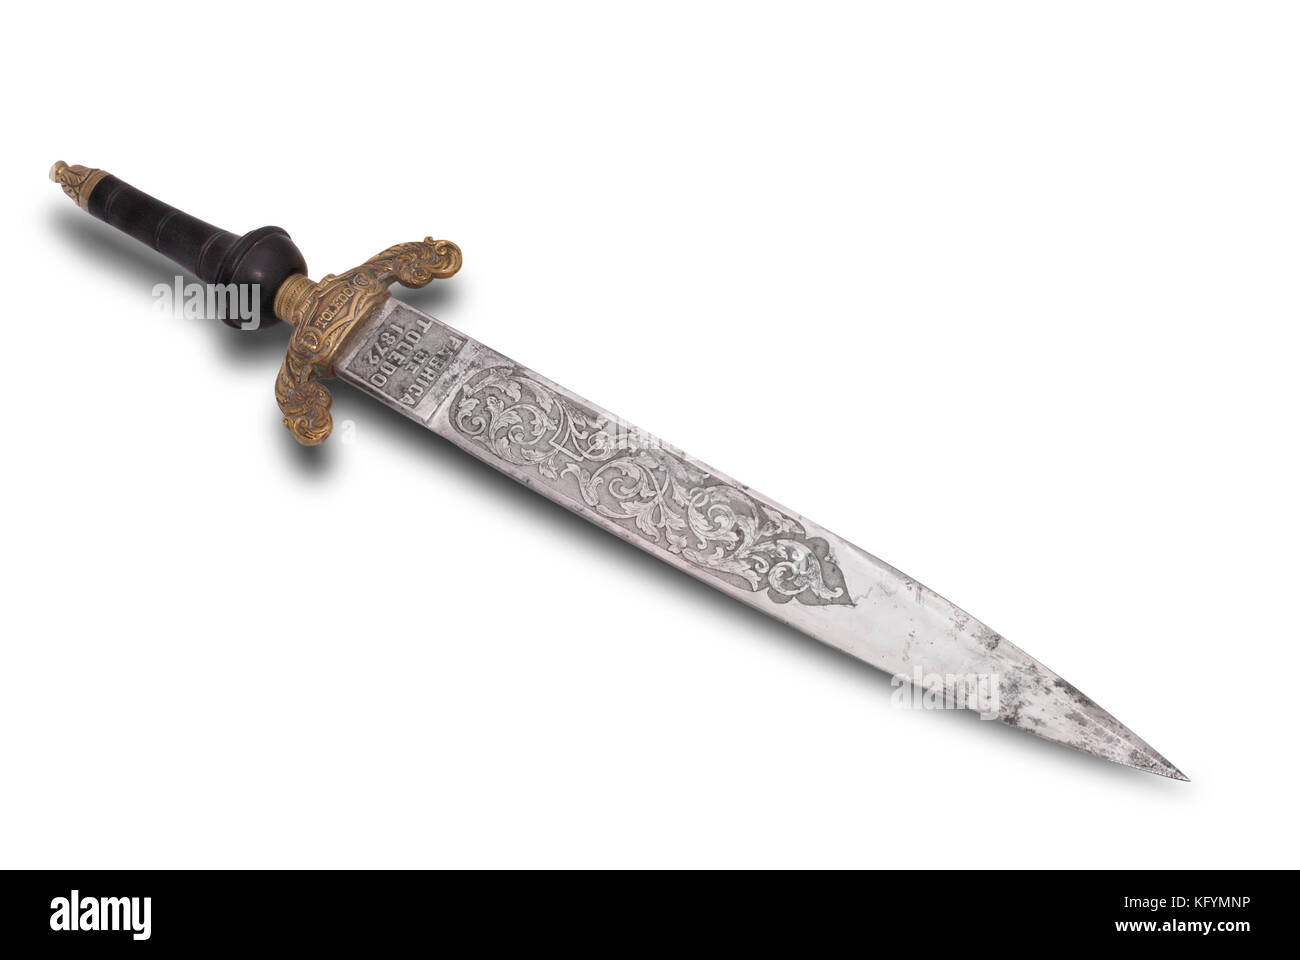 Spanish infantry sword bayonet from famous Toledo steel. Spain. 19th century. This type was placed inside the barrel. Stock Photo